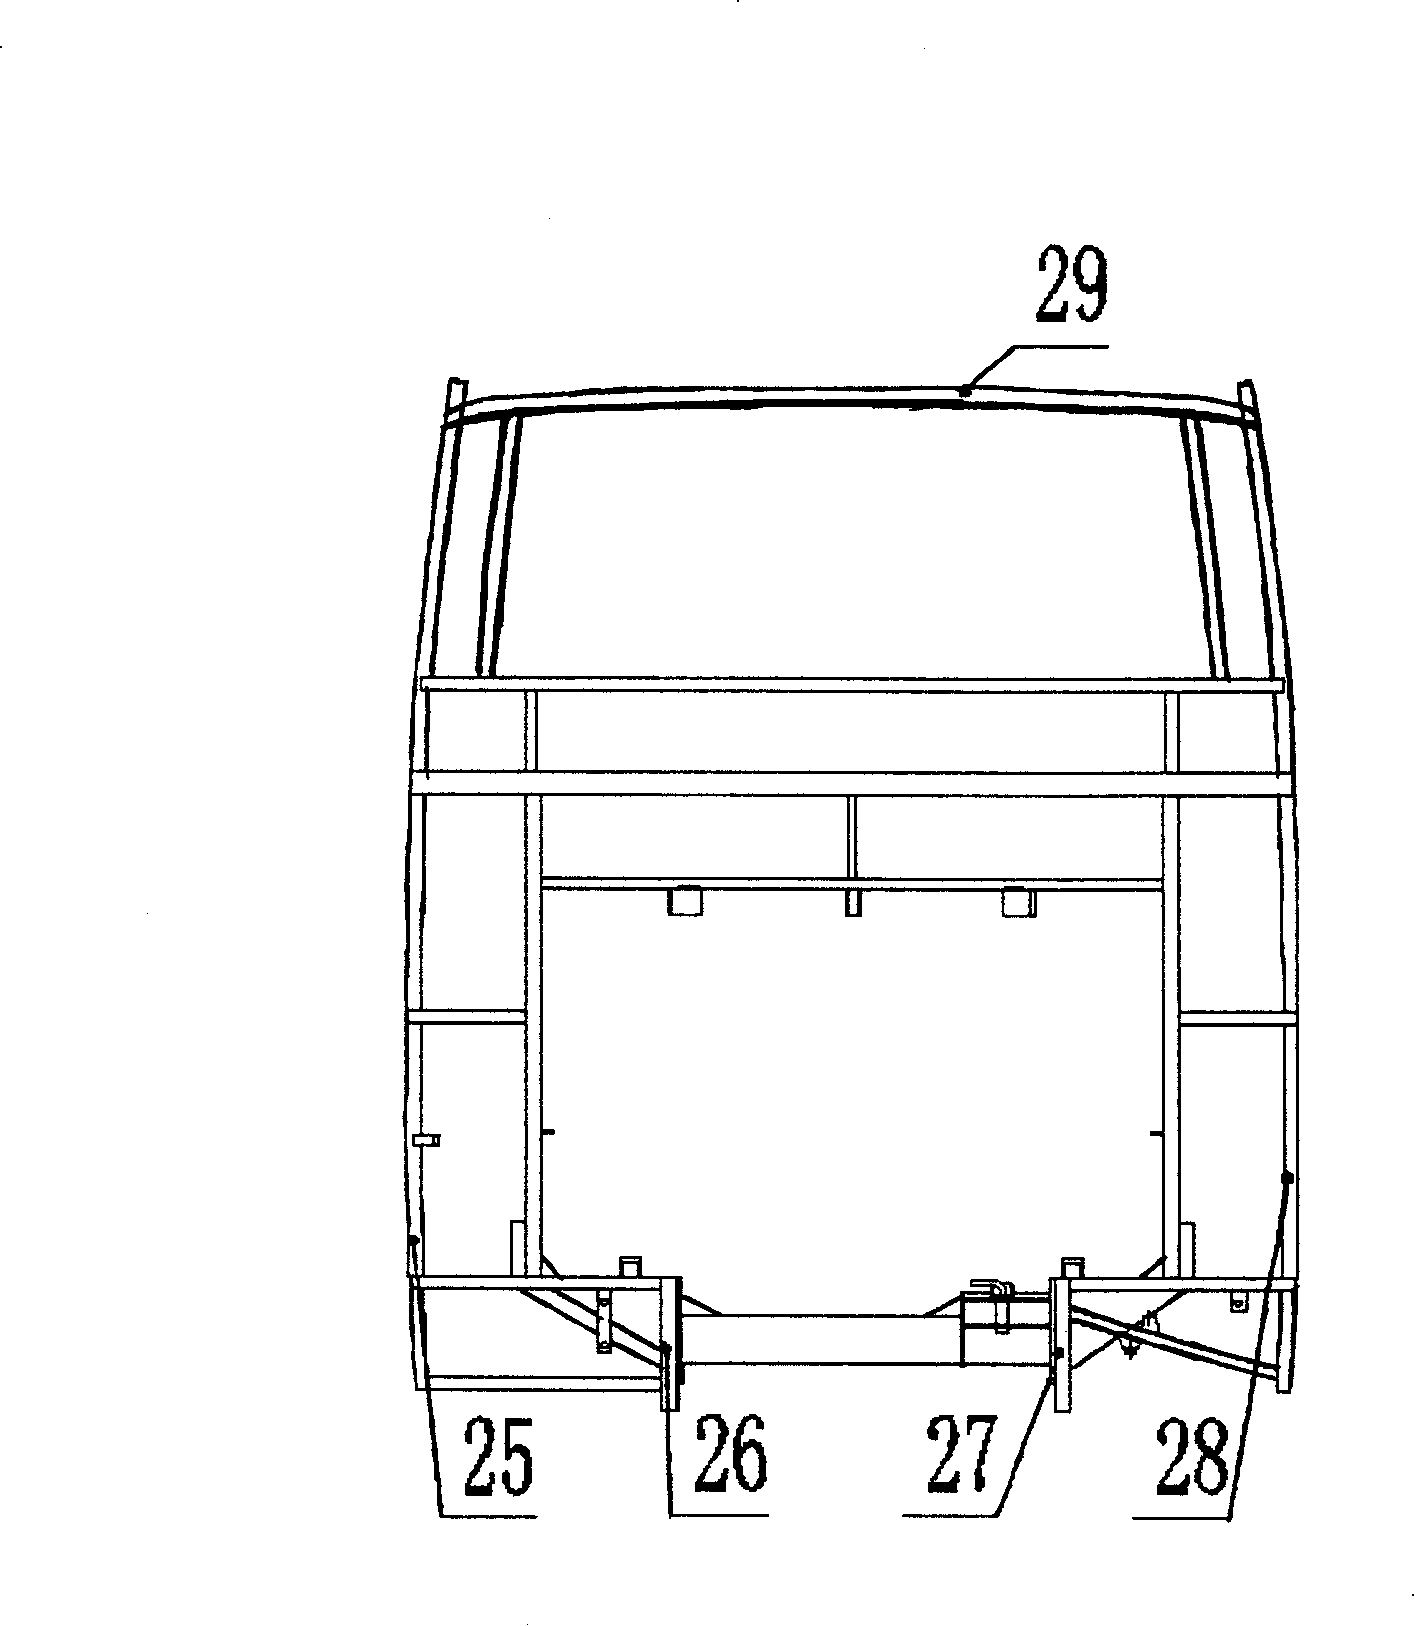 Completely-loaded vehicle body